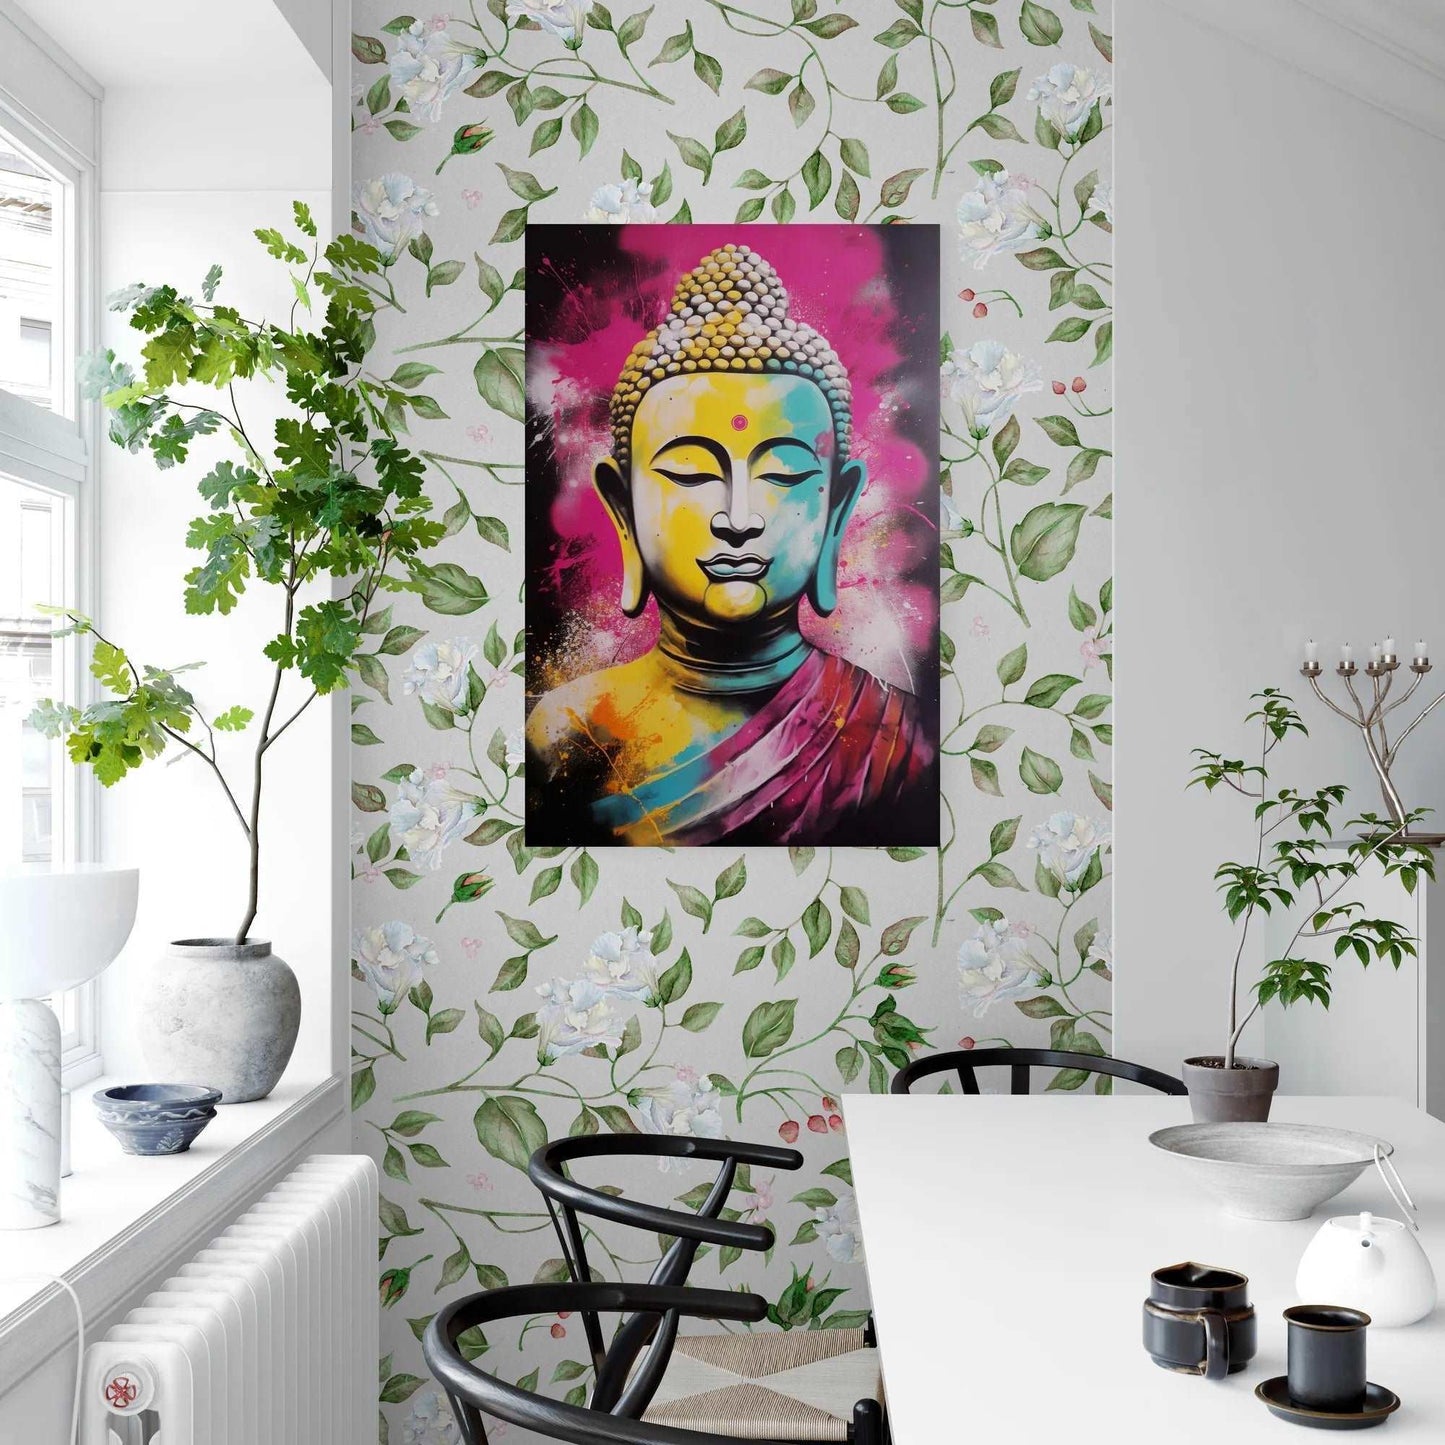 Buddha painting with a blend of striking colors against a floral wallpaper, enhancing the peaceful and stylish atmosphere of a dining area with natural light.